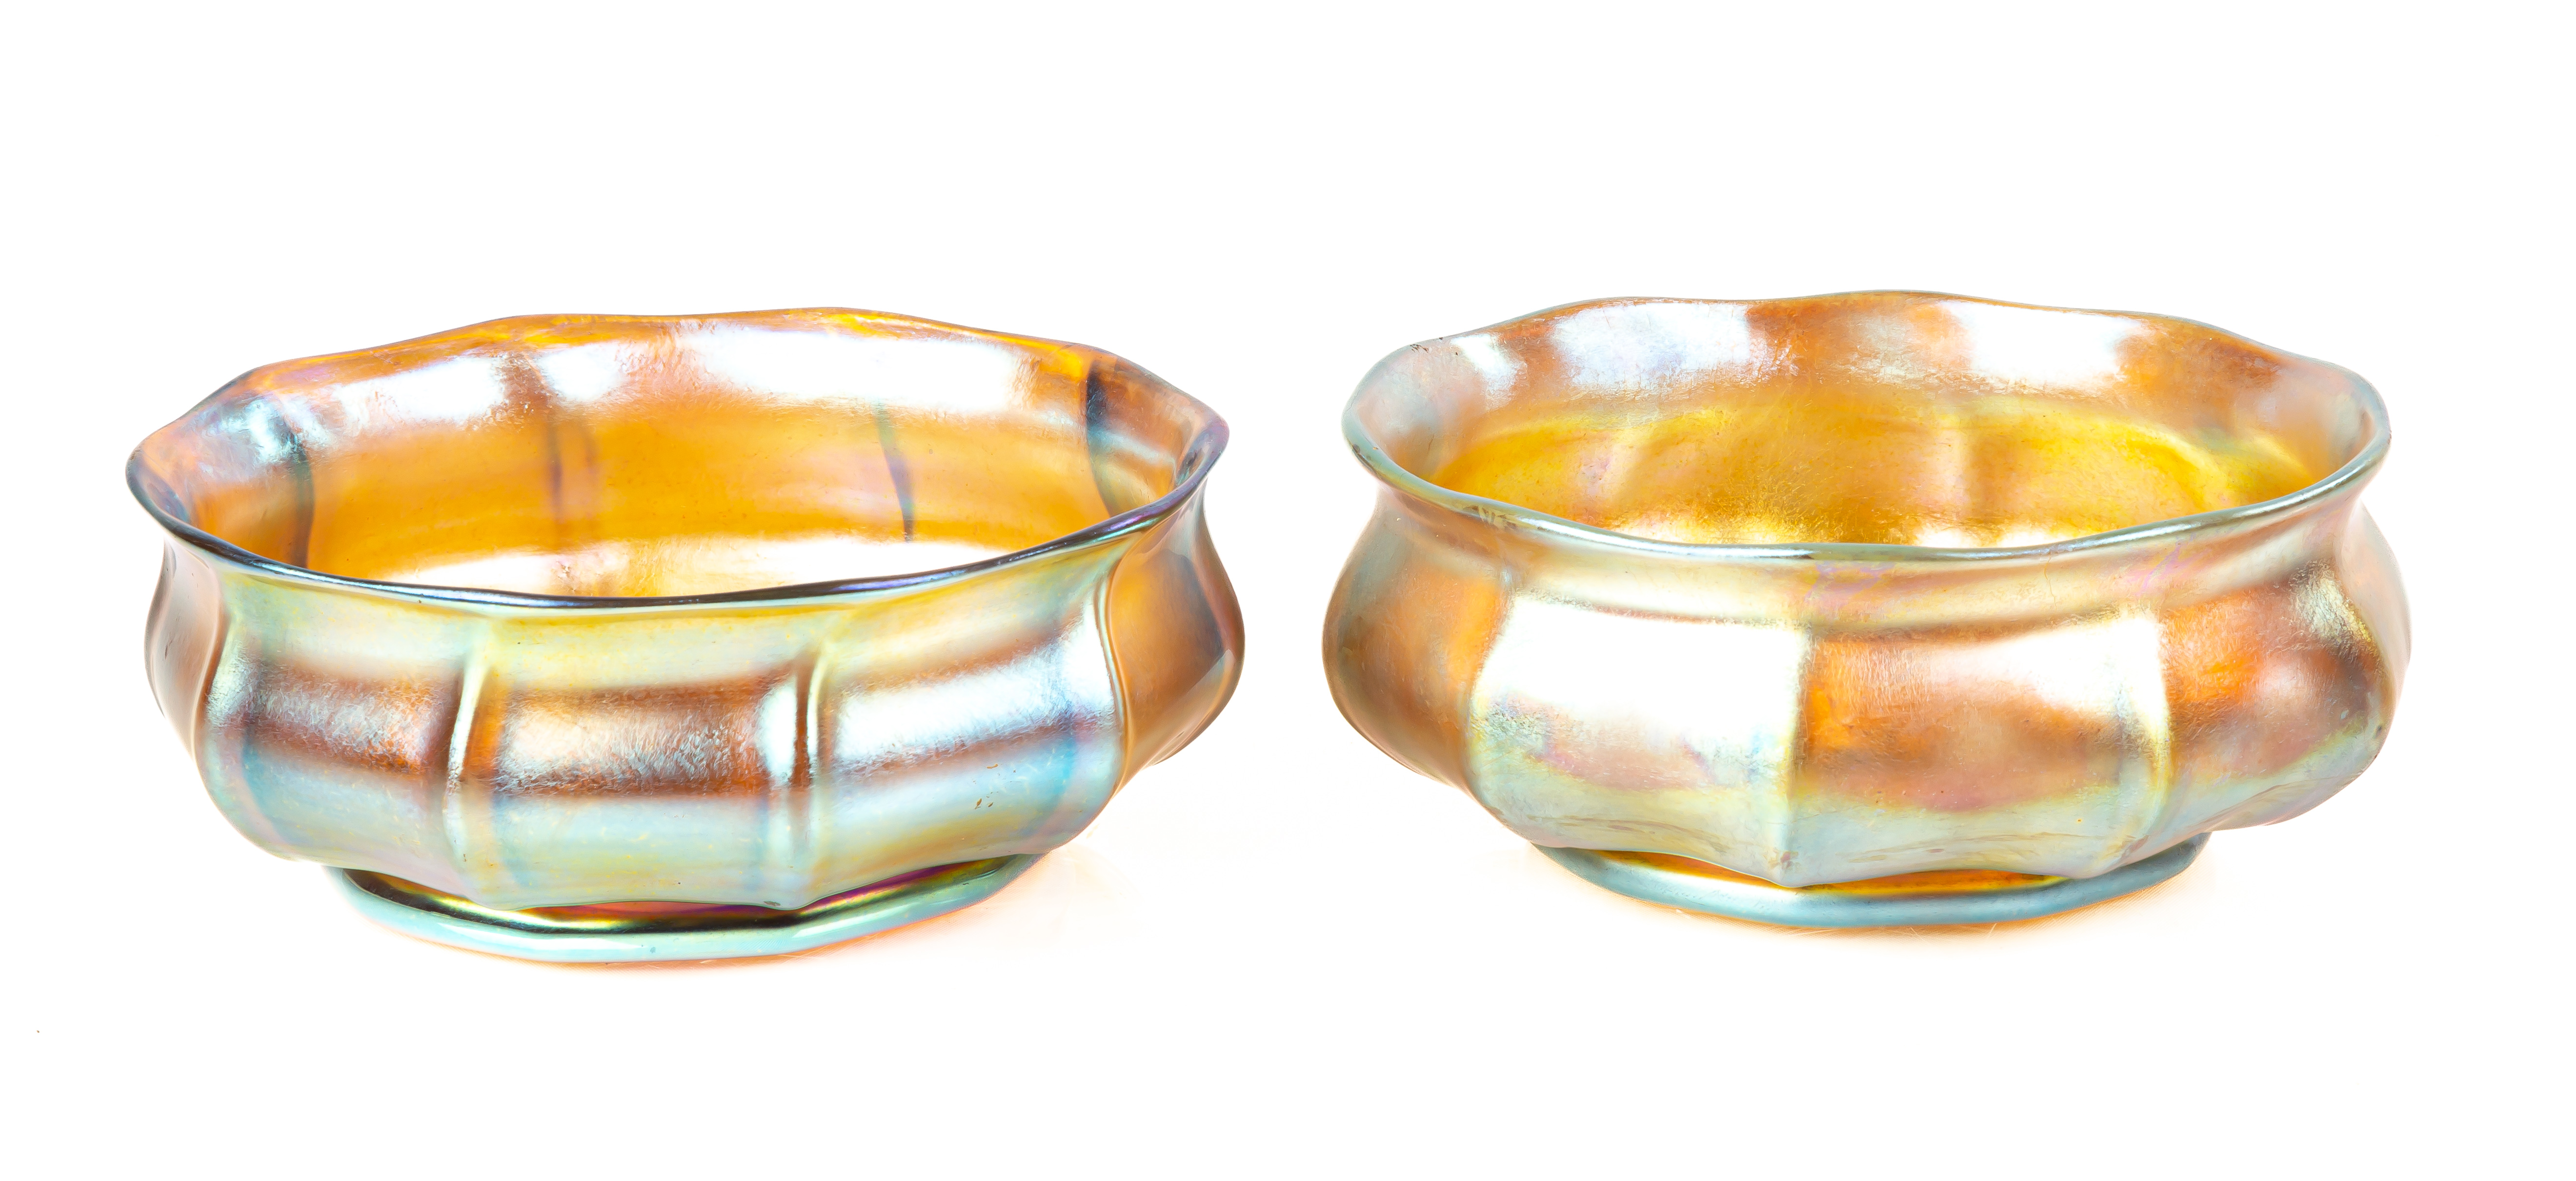 PAIR OF TIFFANY FAVRILE GLASS BOWLS 2f3346